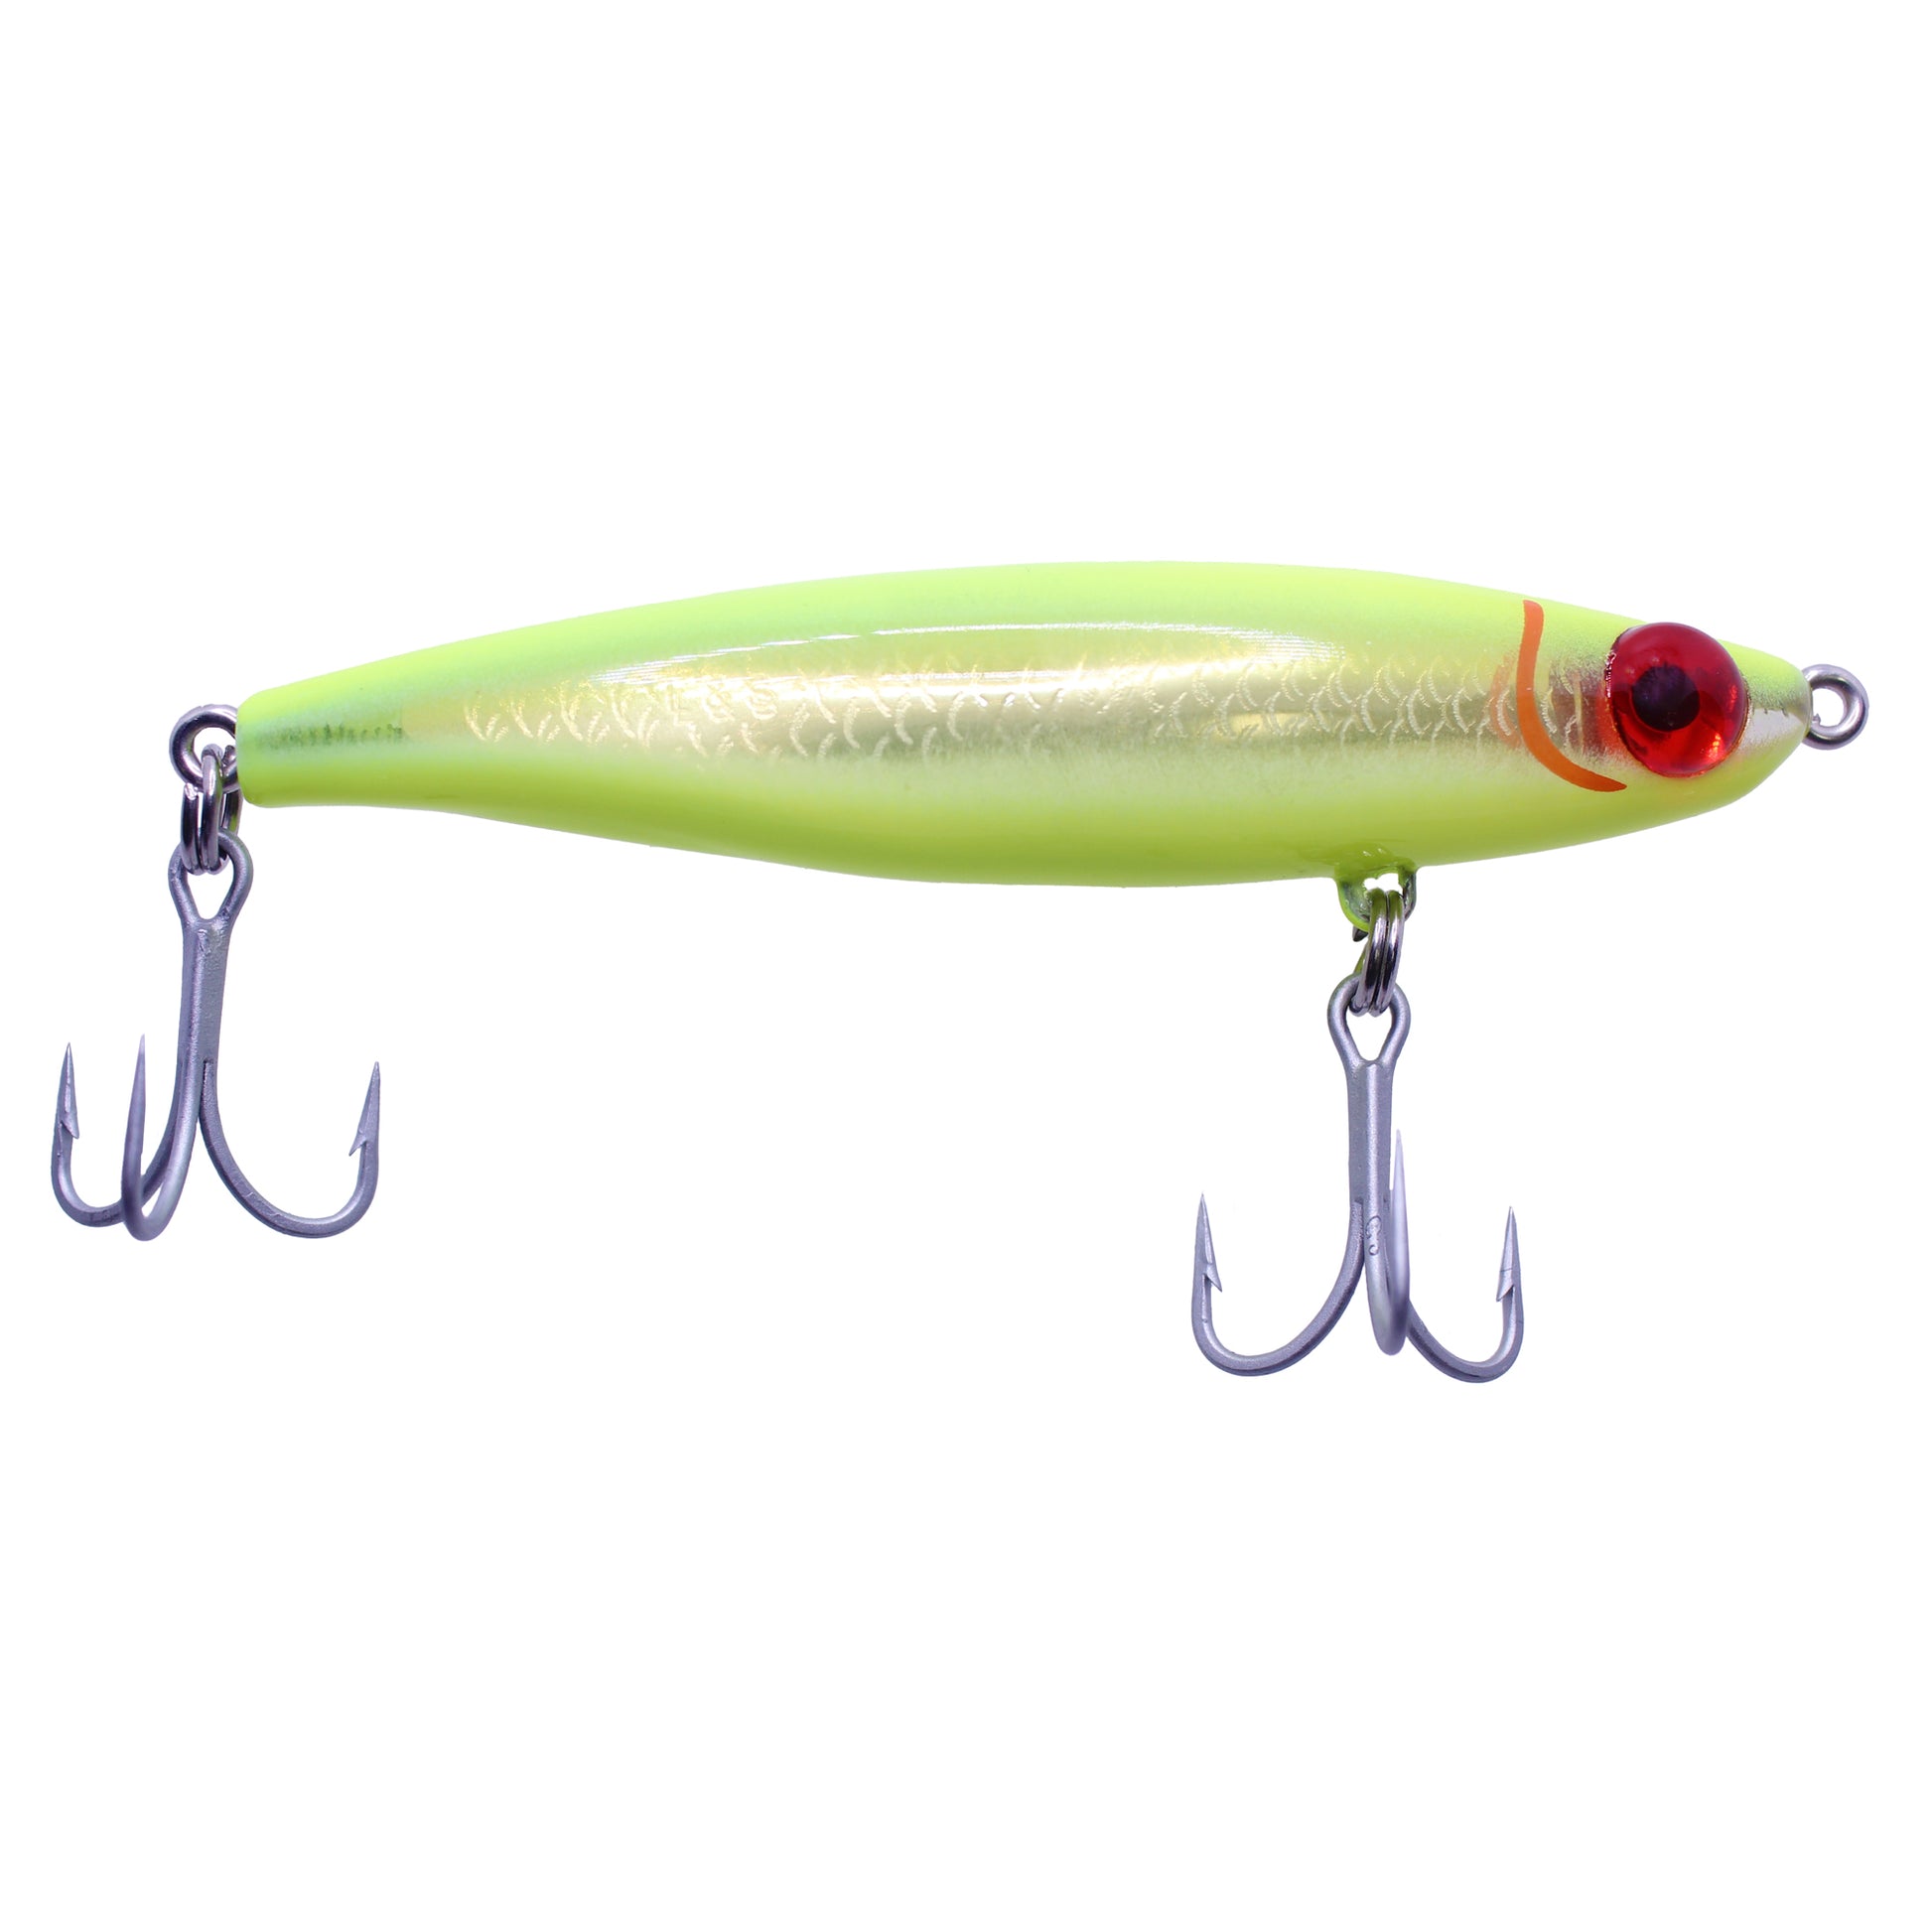 MirrOlure Catch 2000 20MR Suspending Twitchbait – Lures and Lead